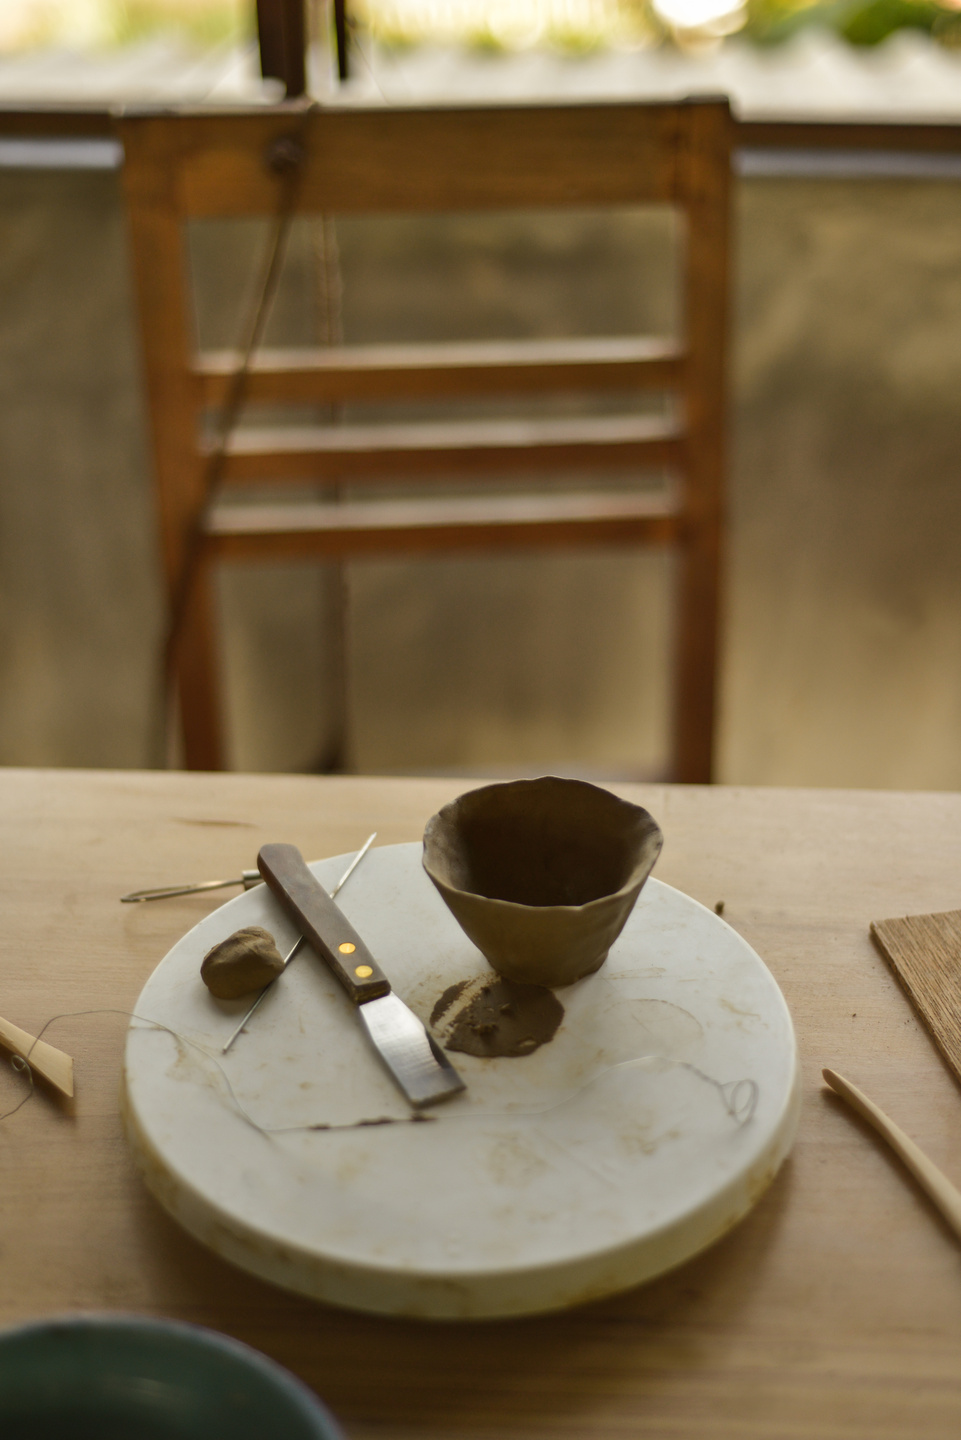 Clay Pinch Pot and Tools in Artist Studio, Thailand